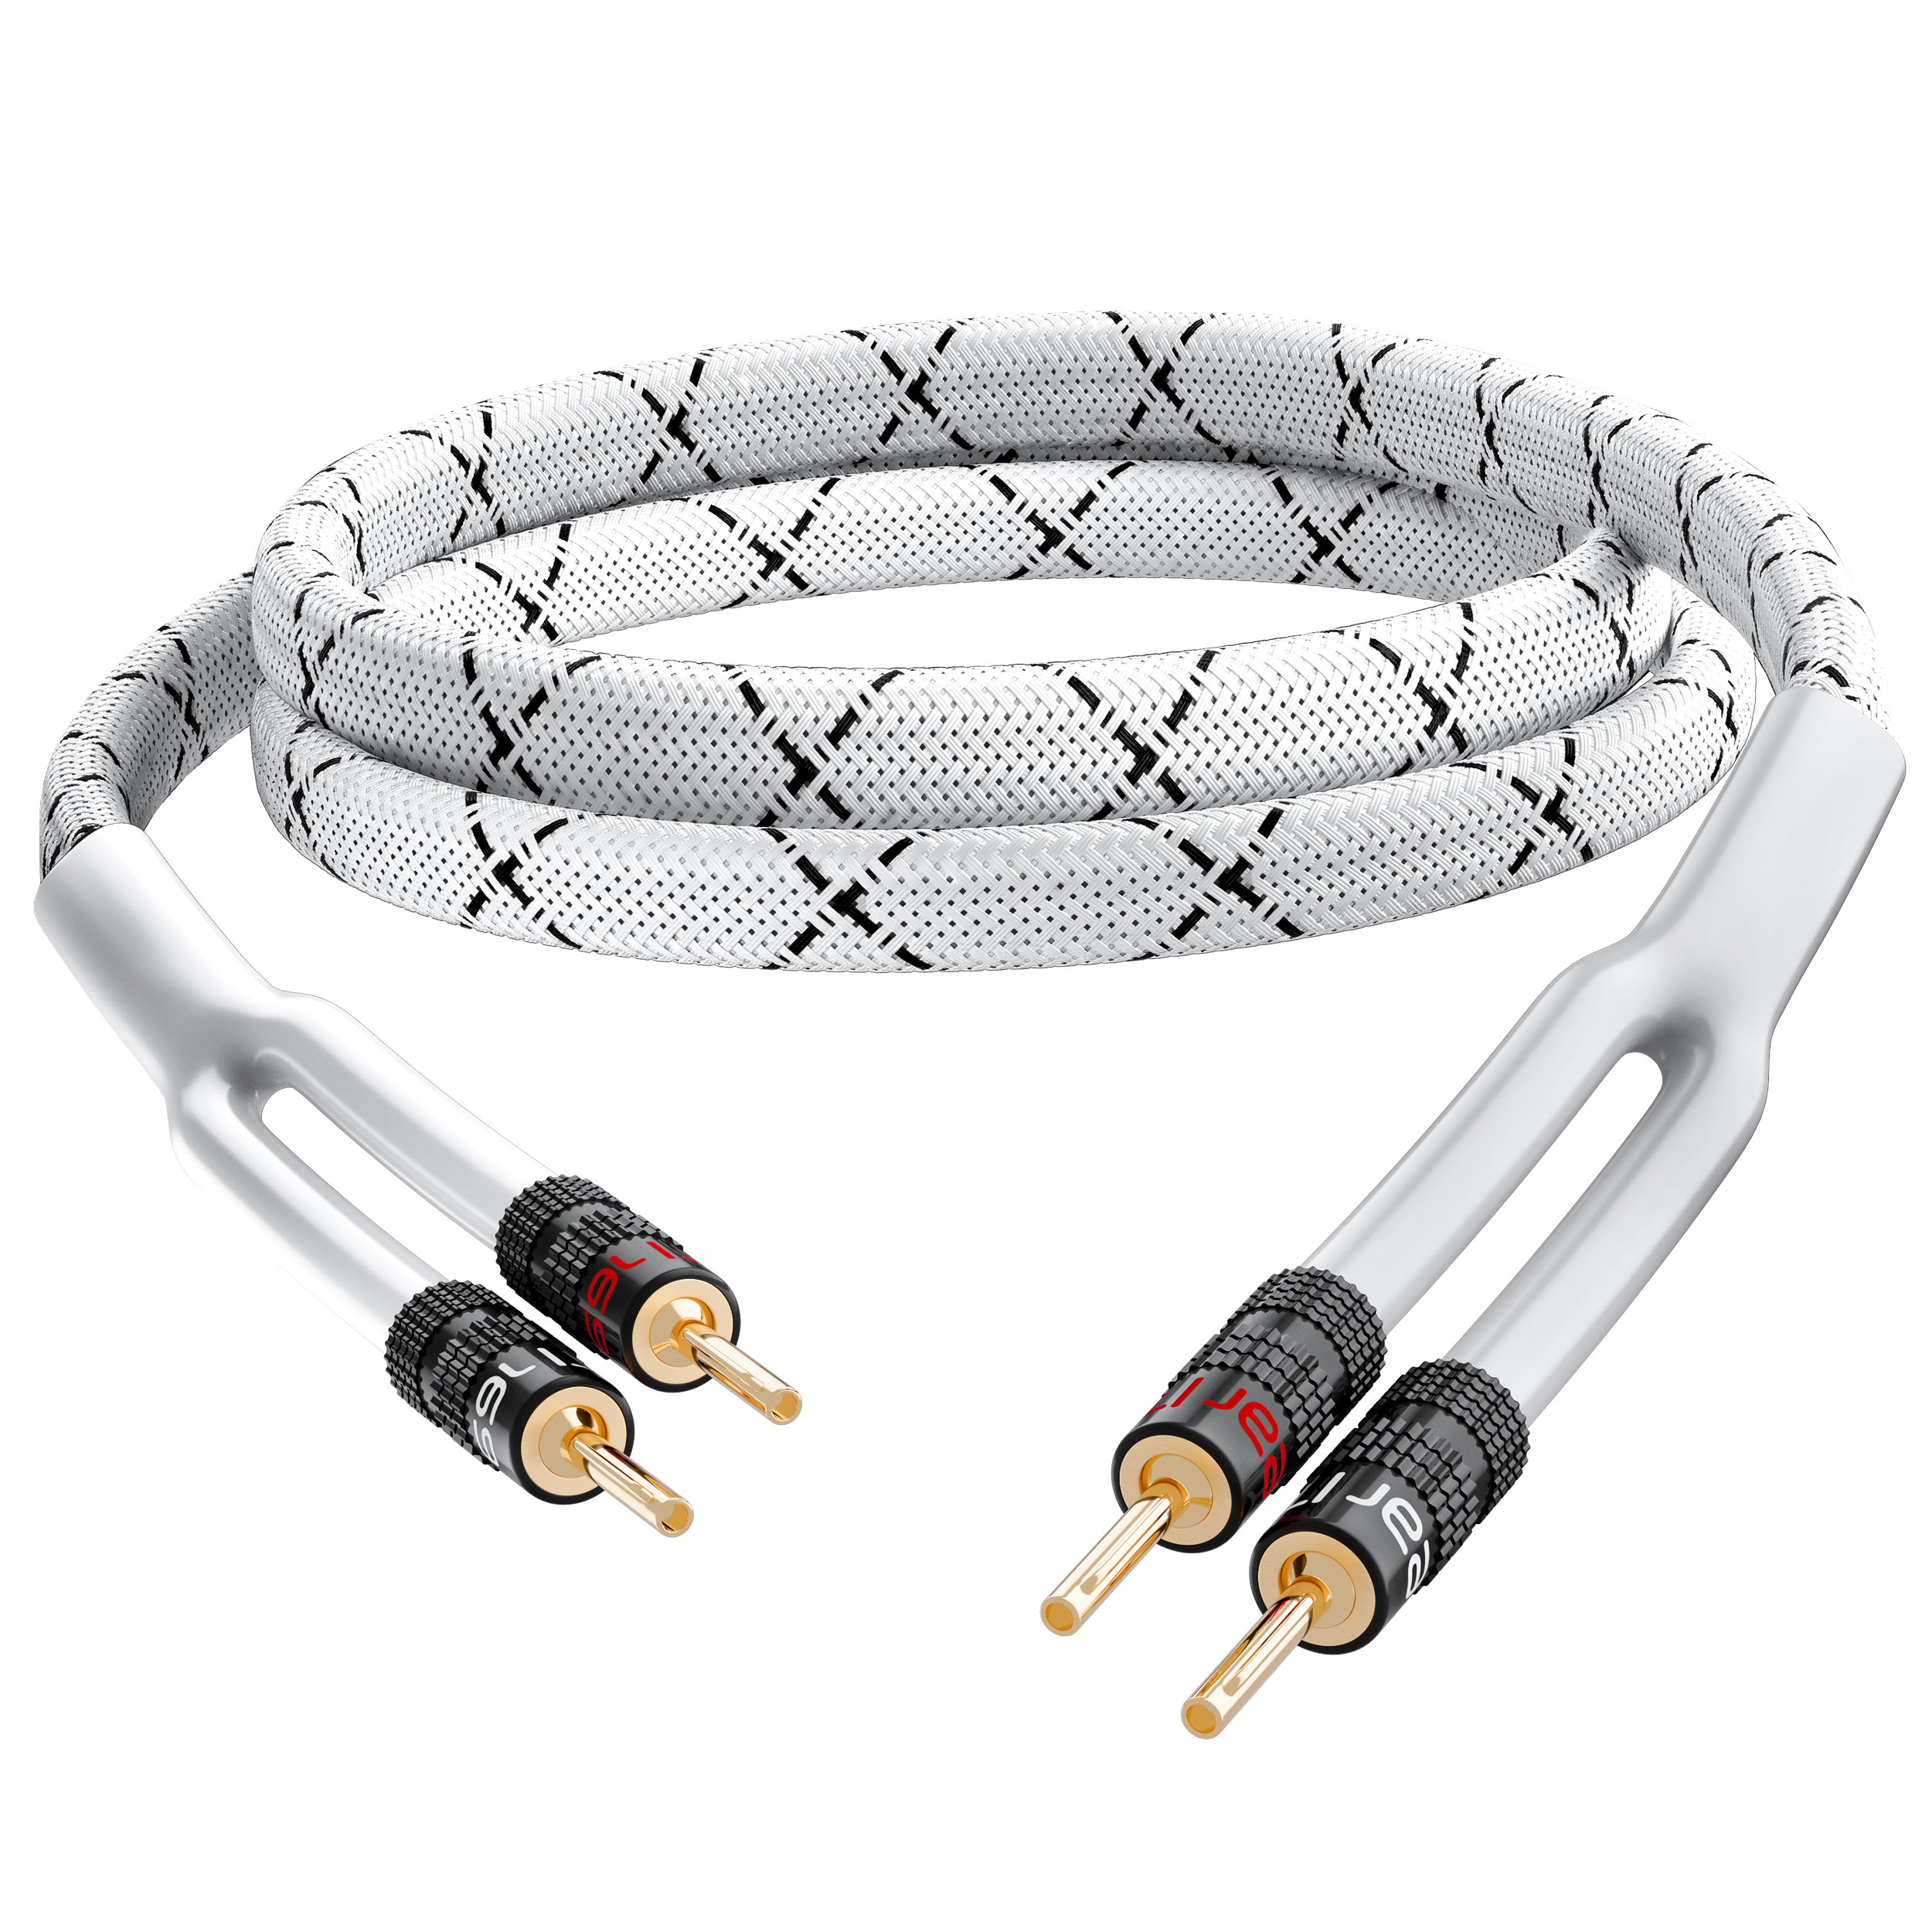 GearIT 12AWG Speaker Cable Wire with Gold-Plated Banana Tip Plugs (3 Feet) In-Wall CL2 Rated, Heavy Duty Braided, 99.9% Oxygen-Free Copper (OFC) - White, 3ft - image 1 of 7